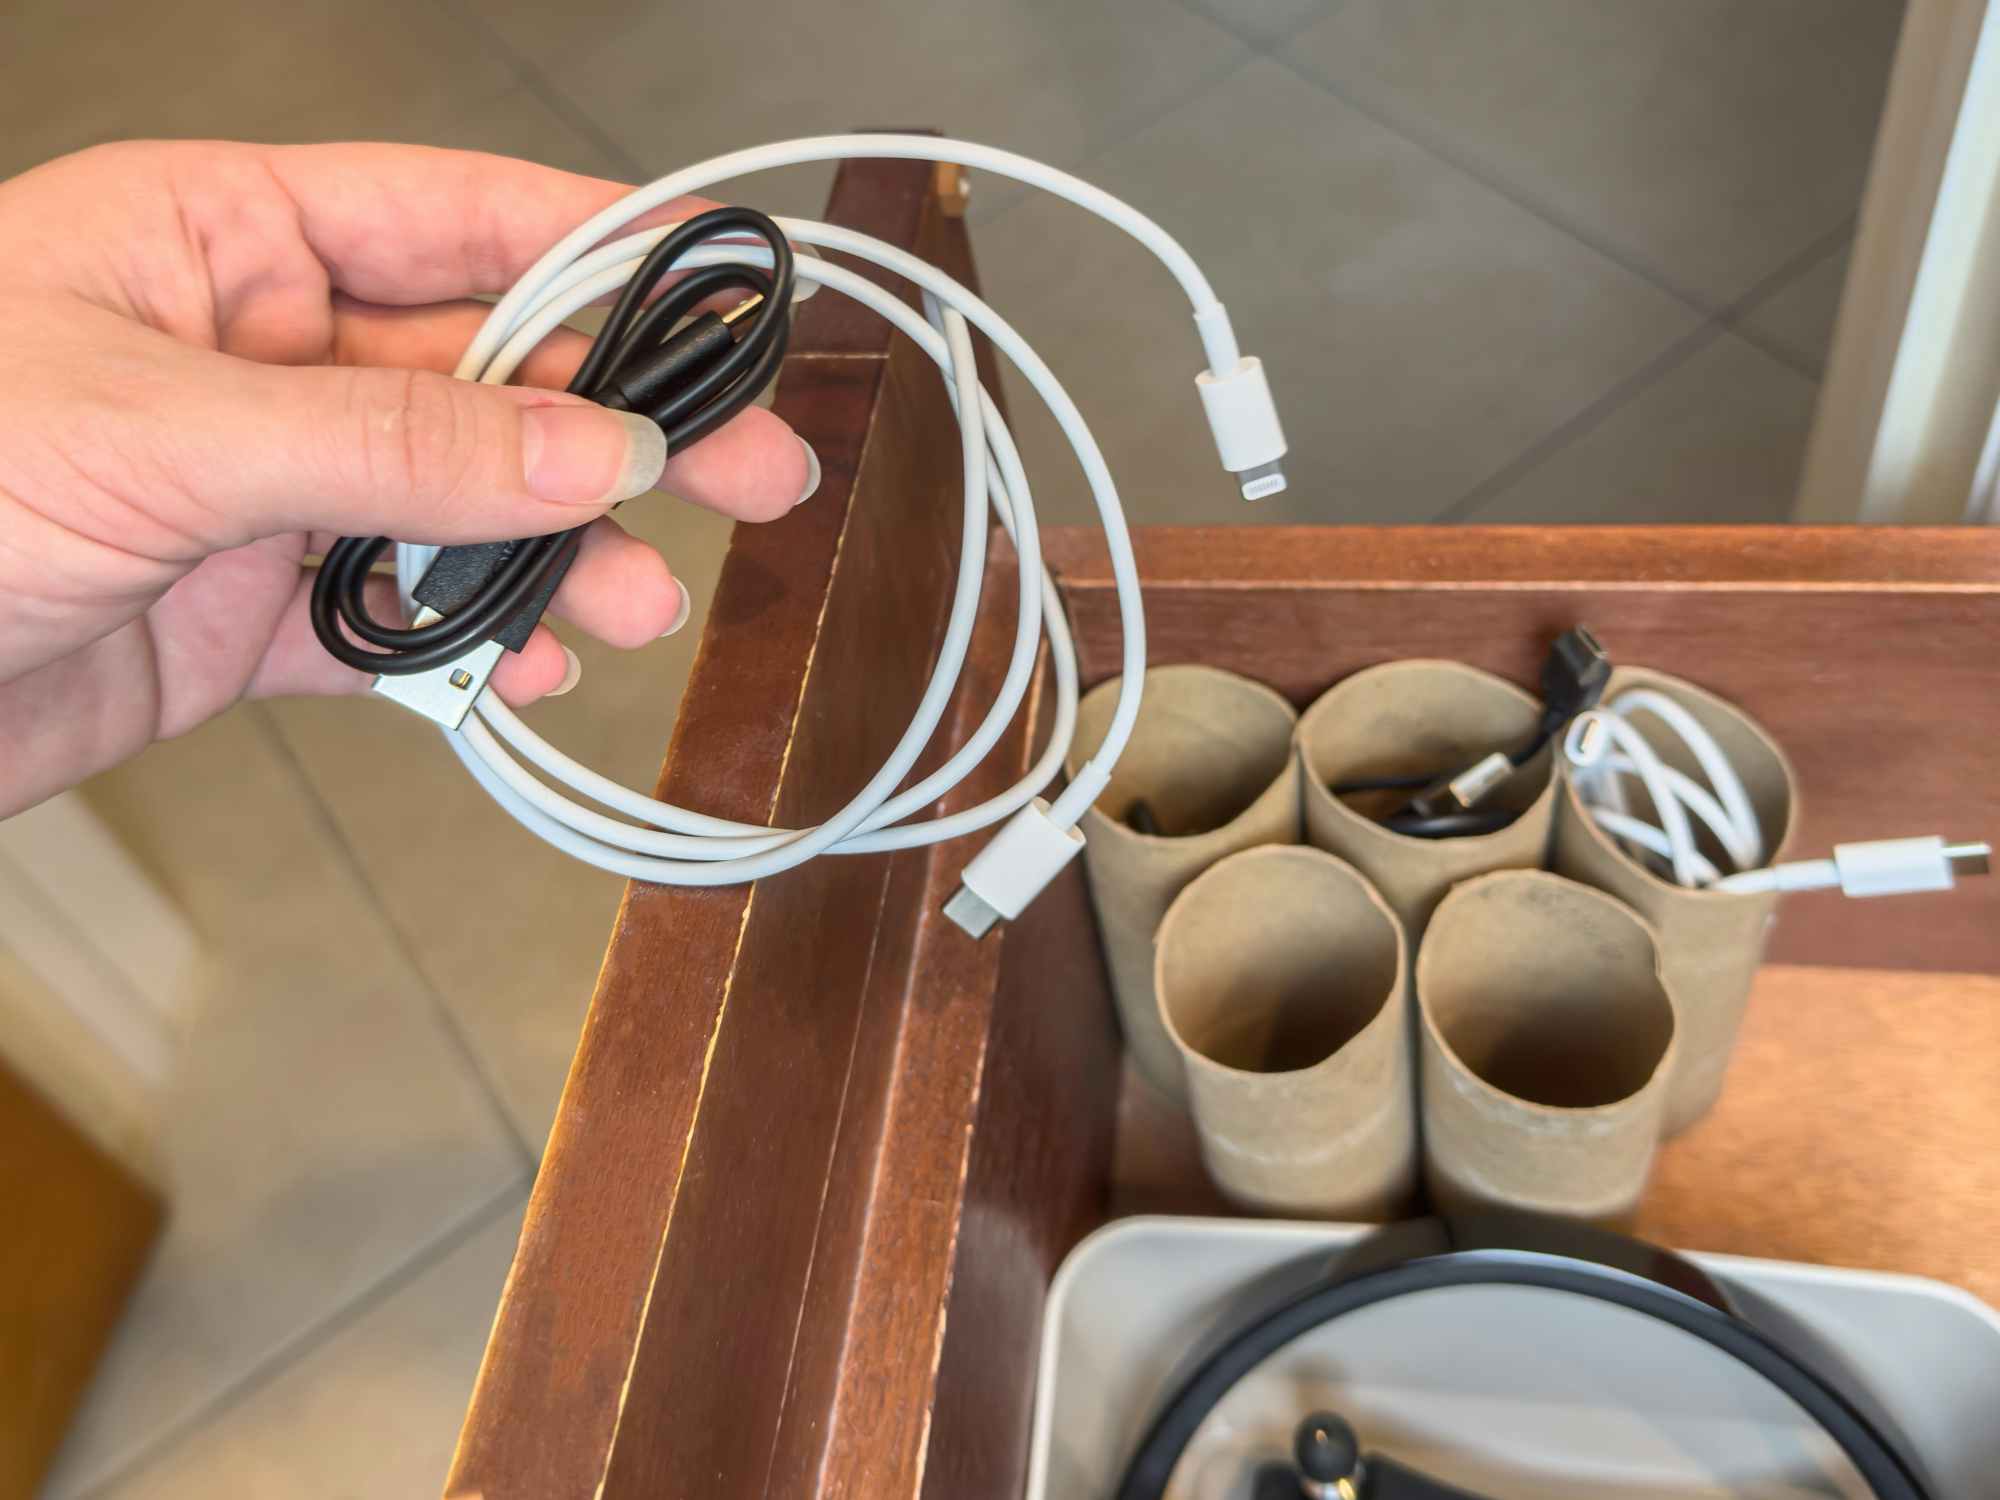 Someone organizing their cords into empty toilet paper tubes set up in a drawer